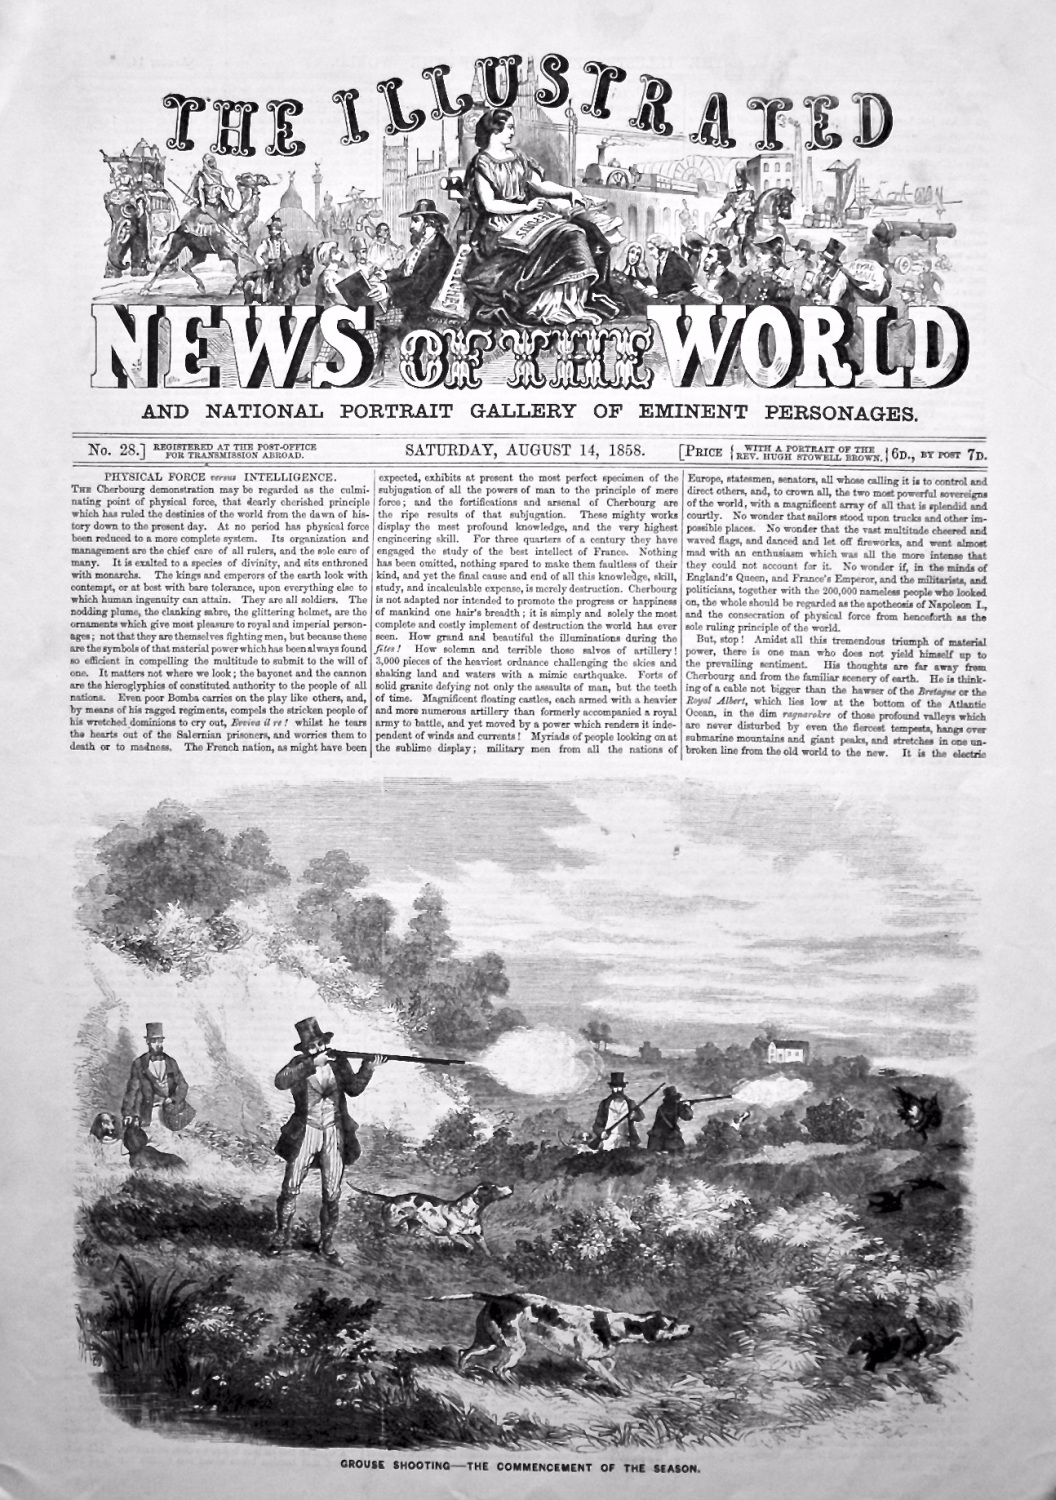 The Illustrated News of the World, August 14th, 1858.